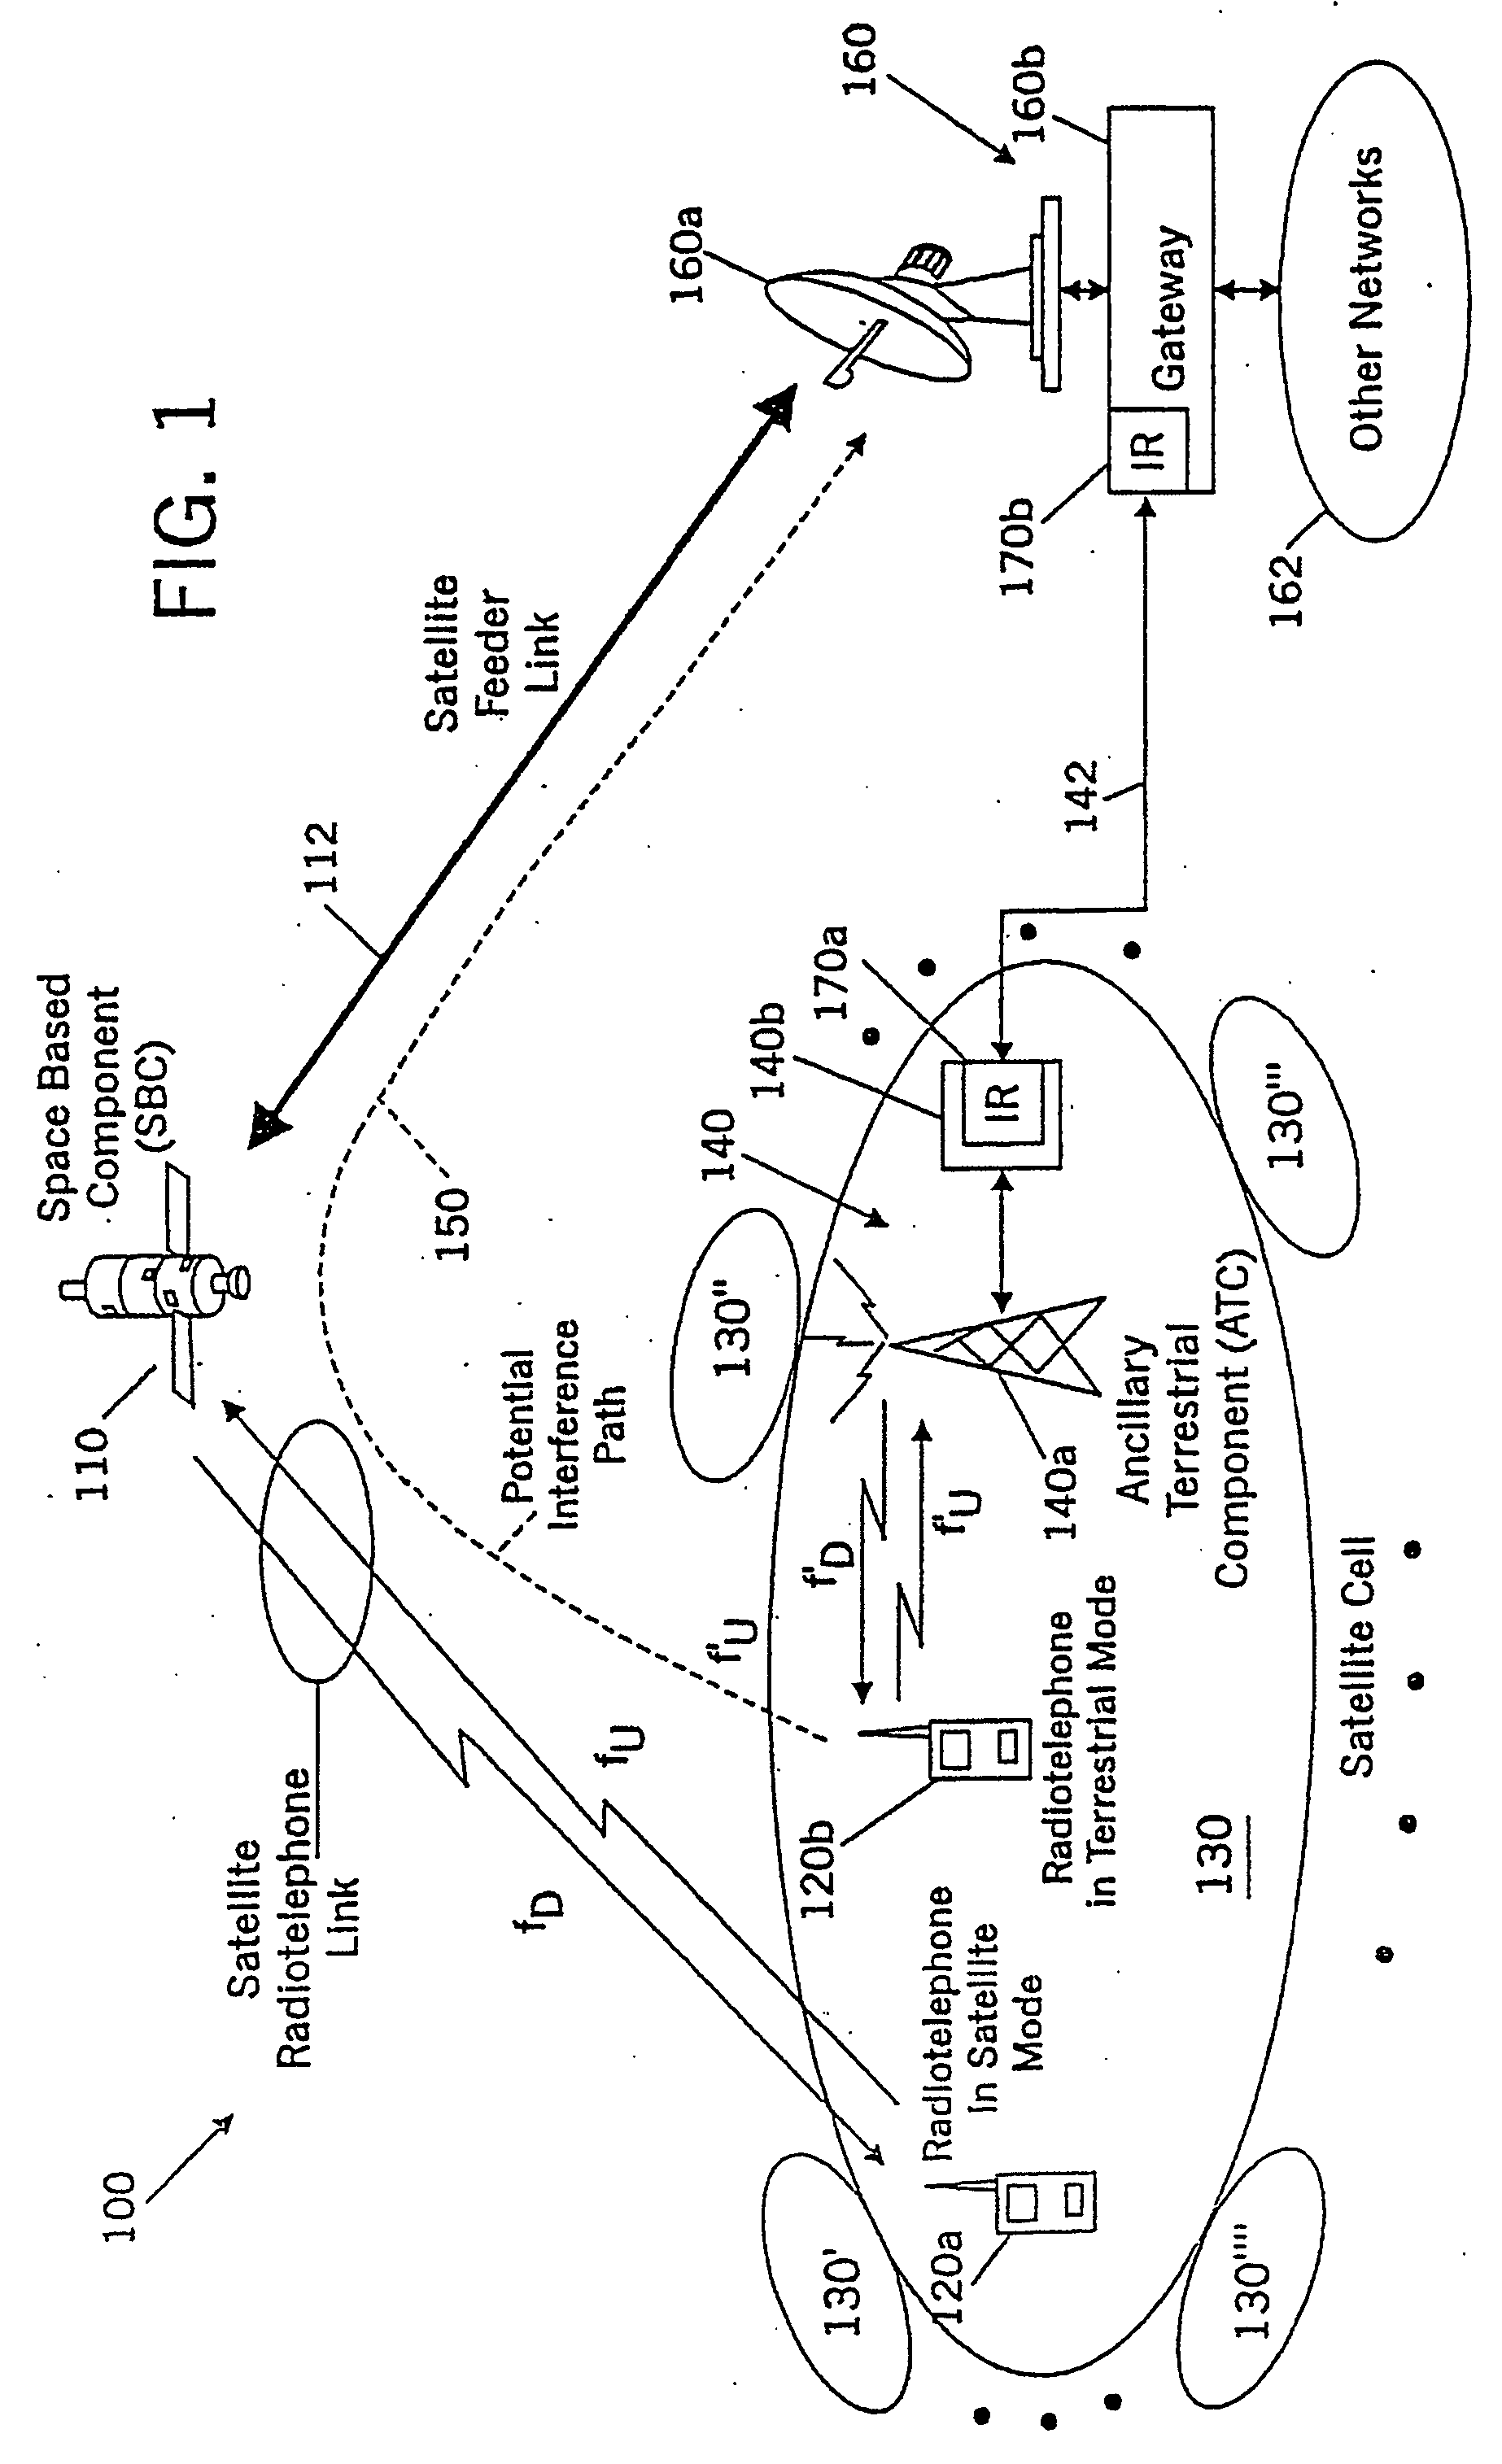 Systems and methods for terrestrial reuse of cellular satellite frequency spectrum in a time-division duplex and/or frequency-division duplex mode